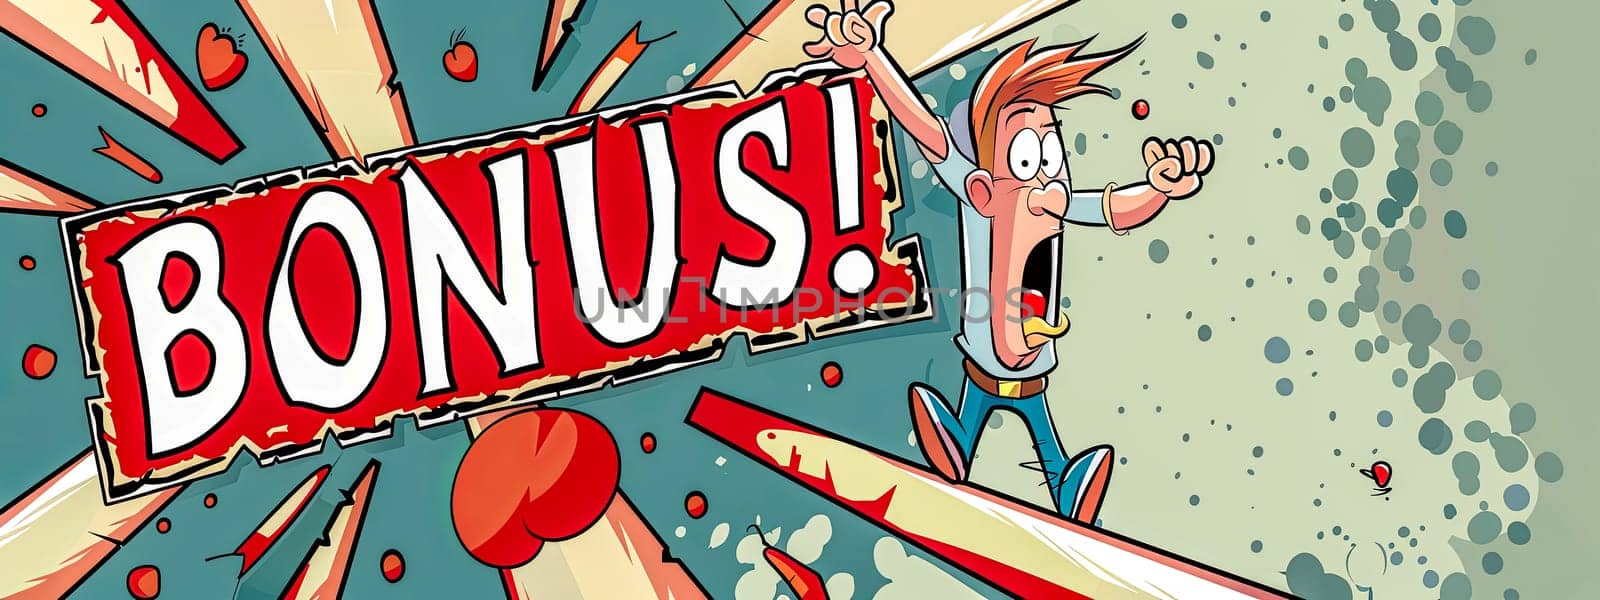 Vibrant illustration of a cartoon man running towards a 'bonus!' sign with a surprised expression